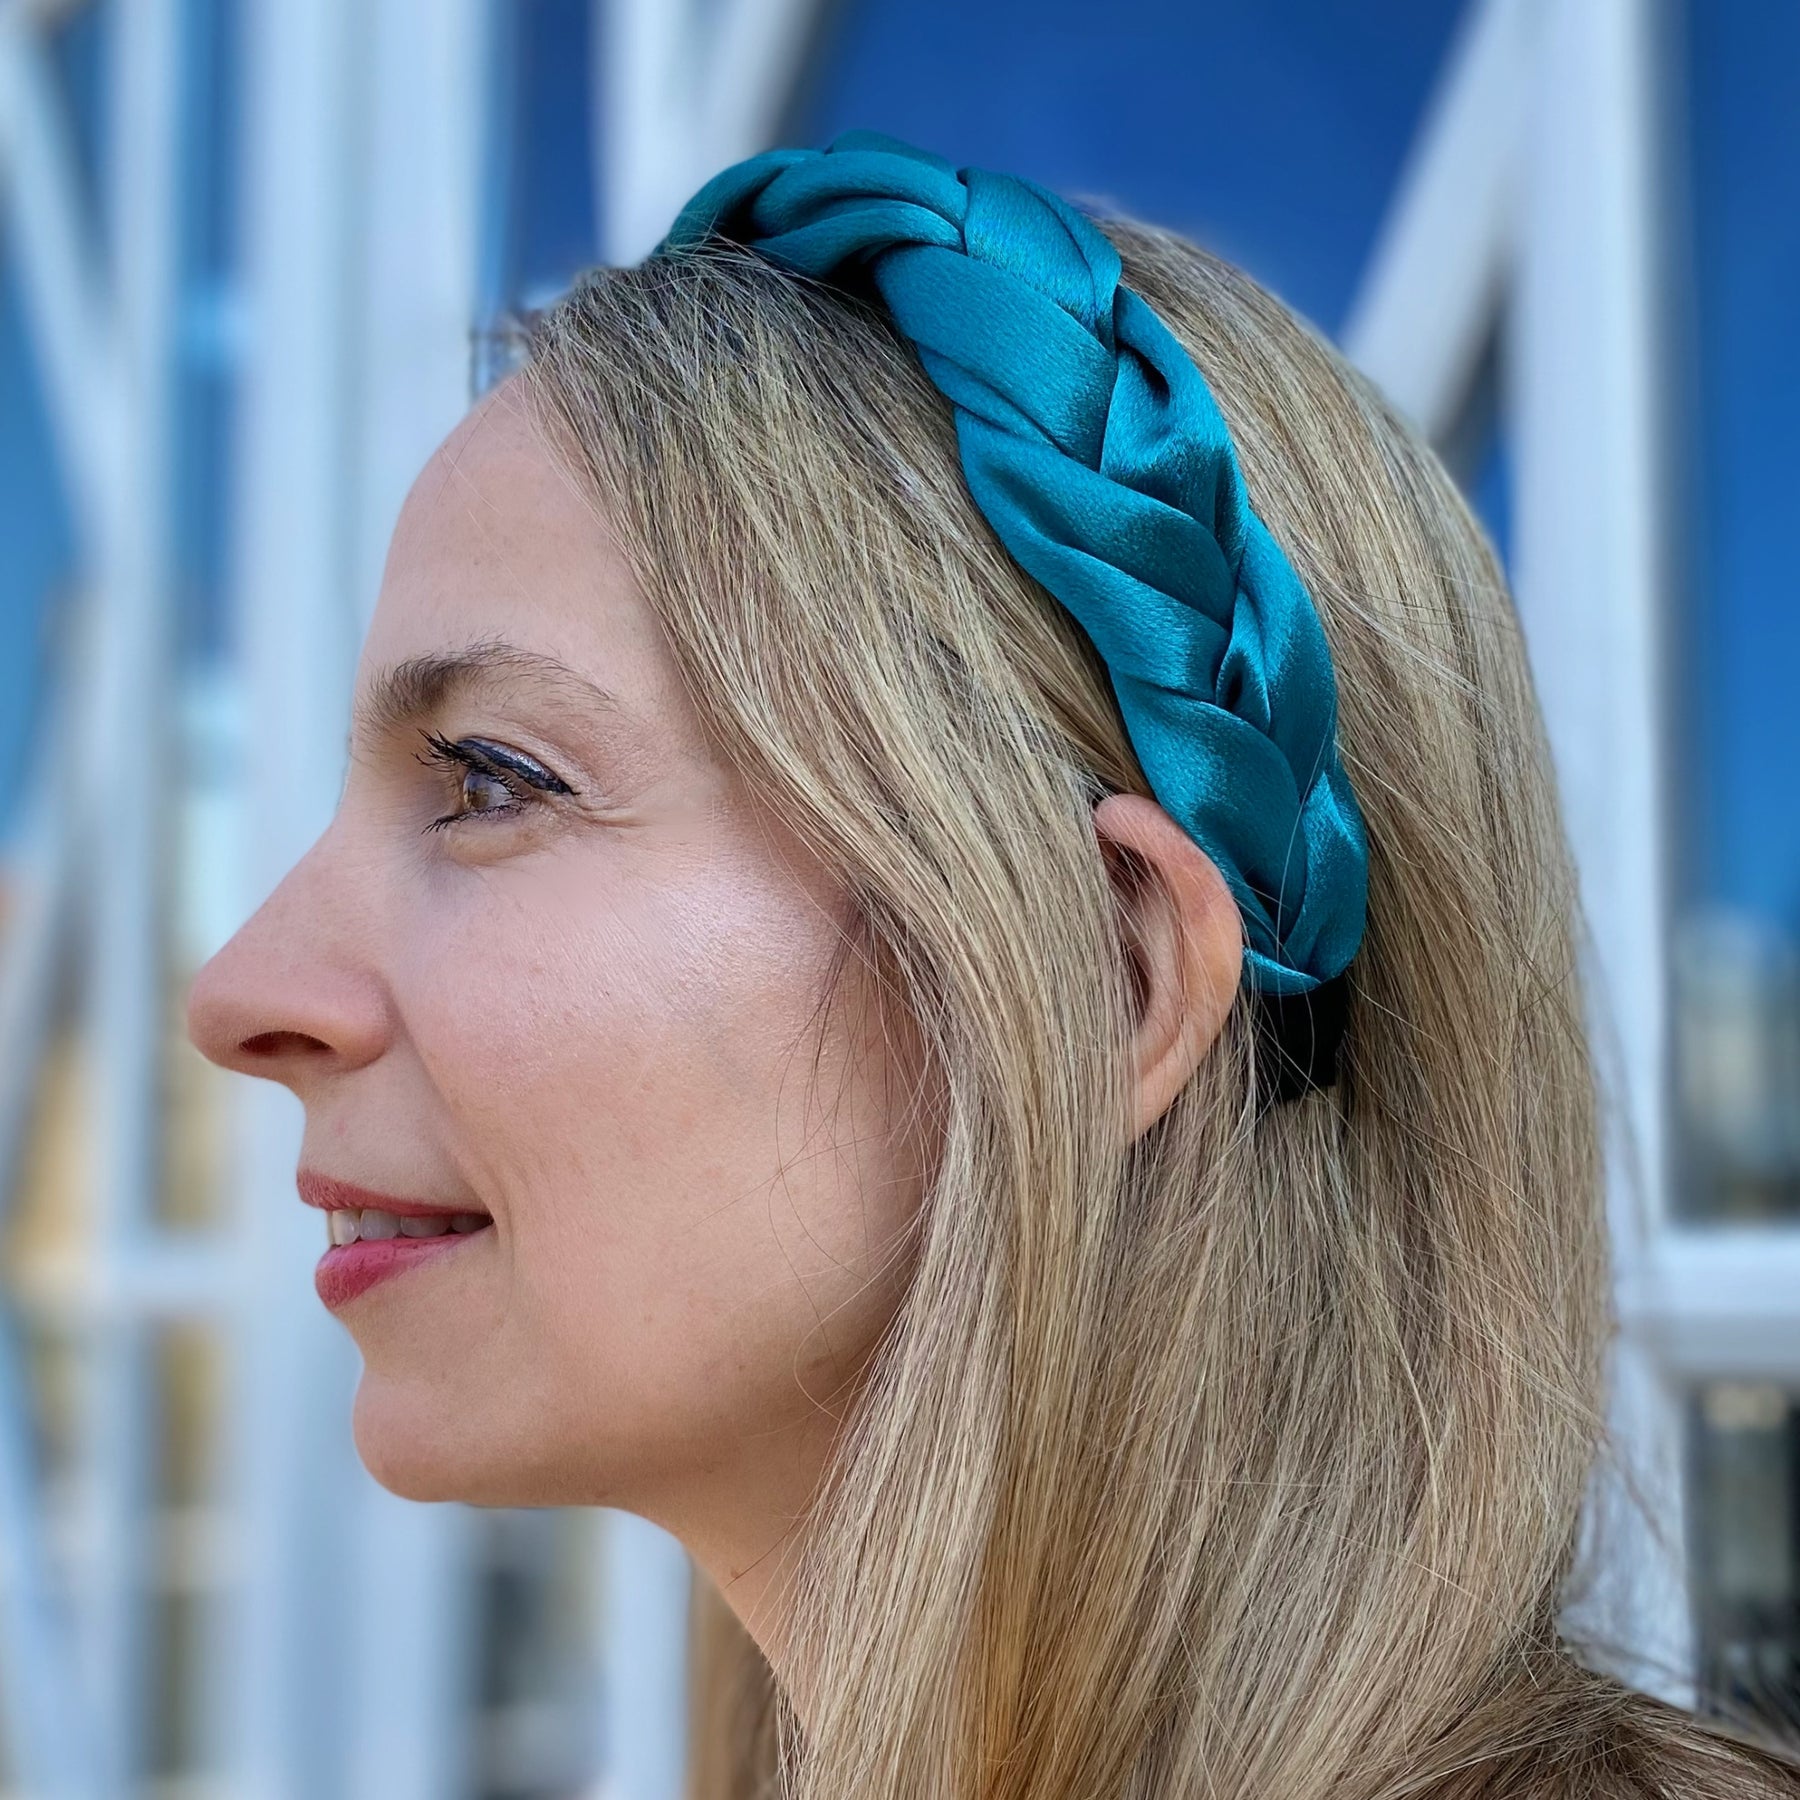 – Headband Turquoise Accessories Braided QueenMee